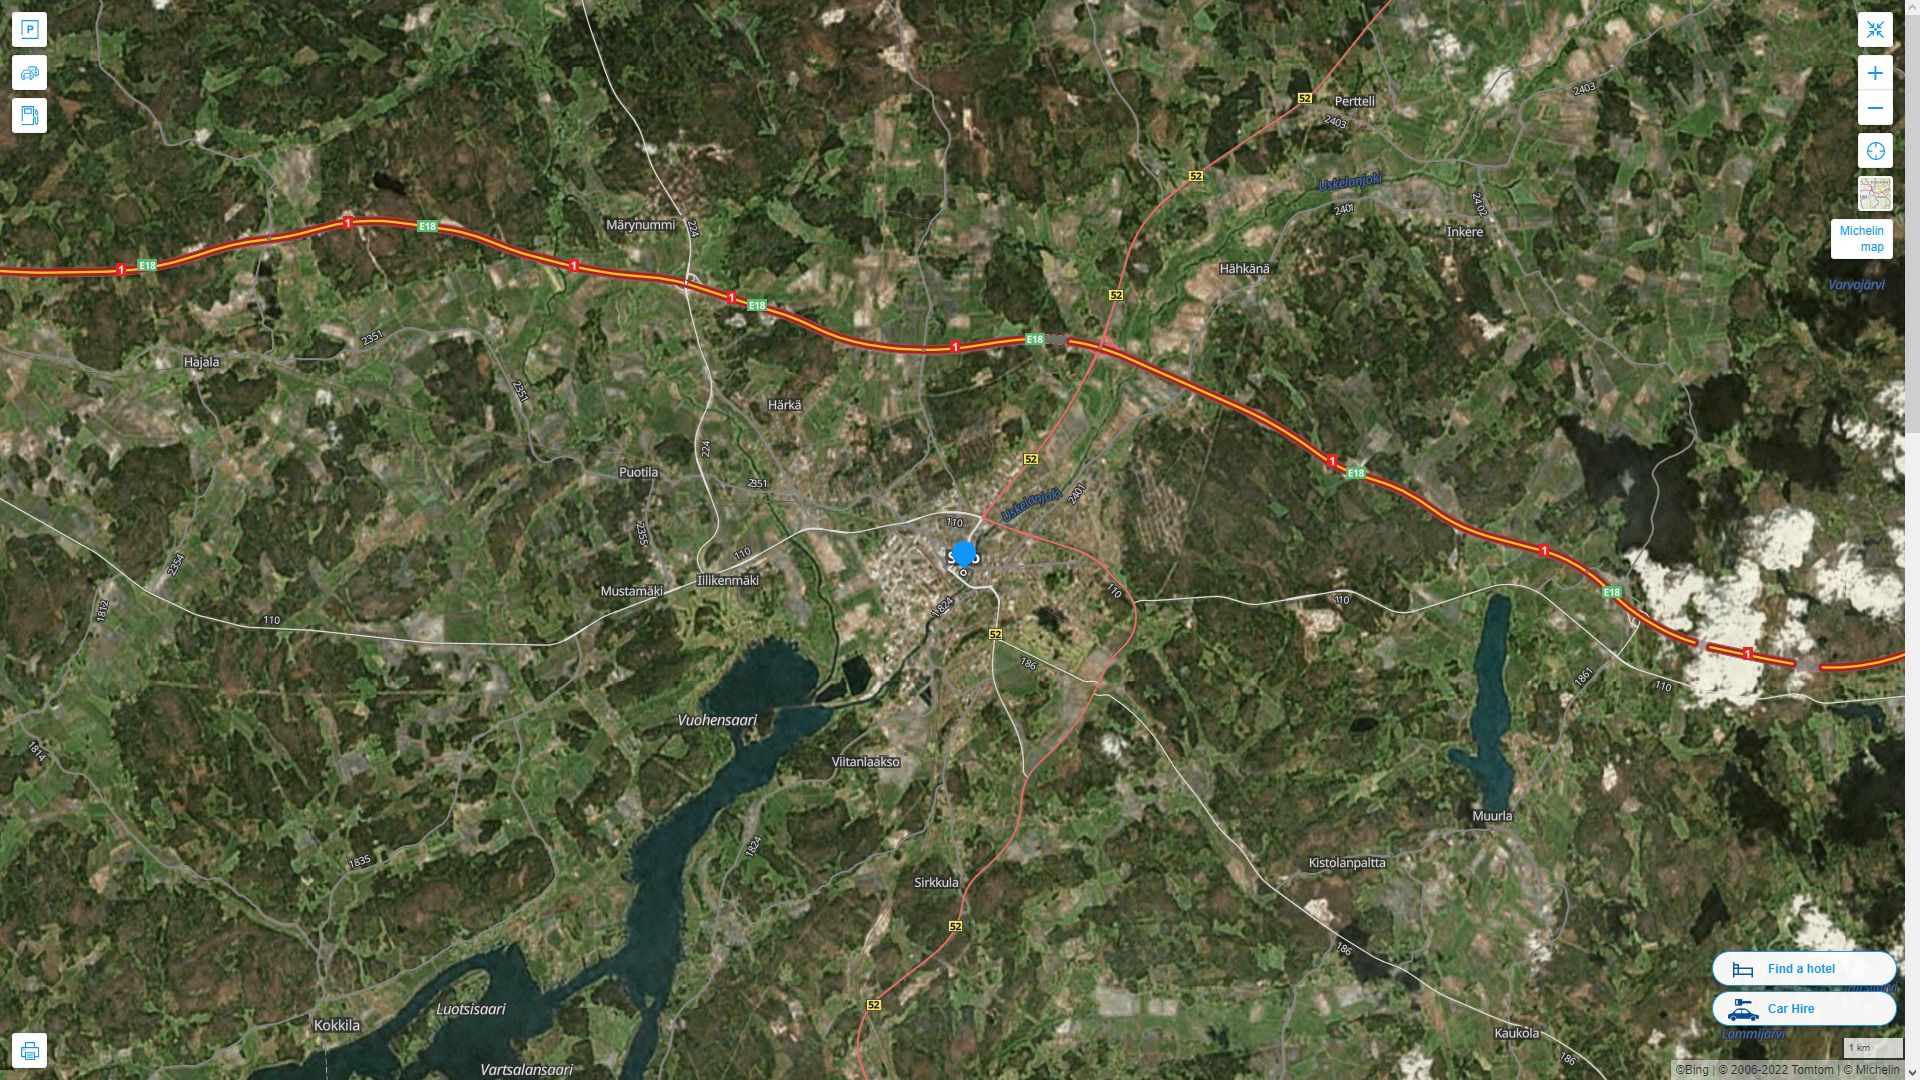 Salo Highway and Road Map with Satellite View